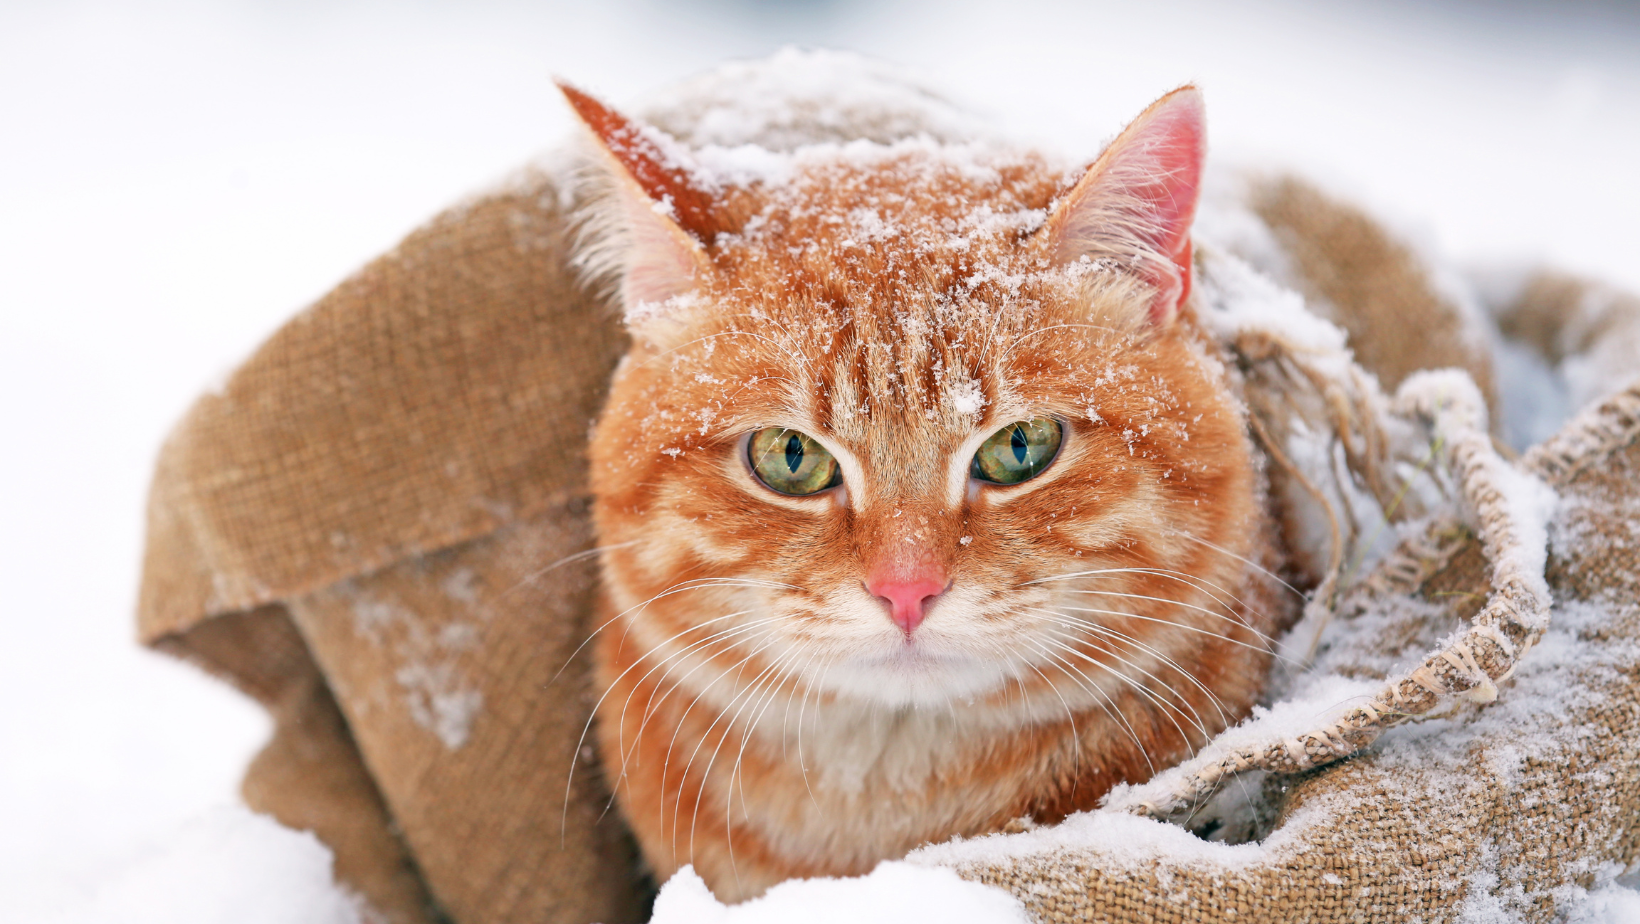 image of a cat in snow